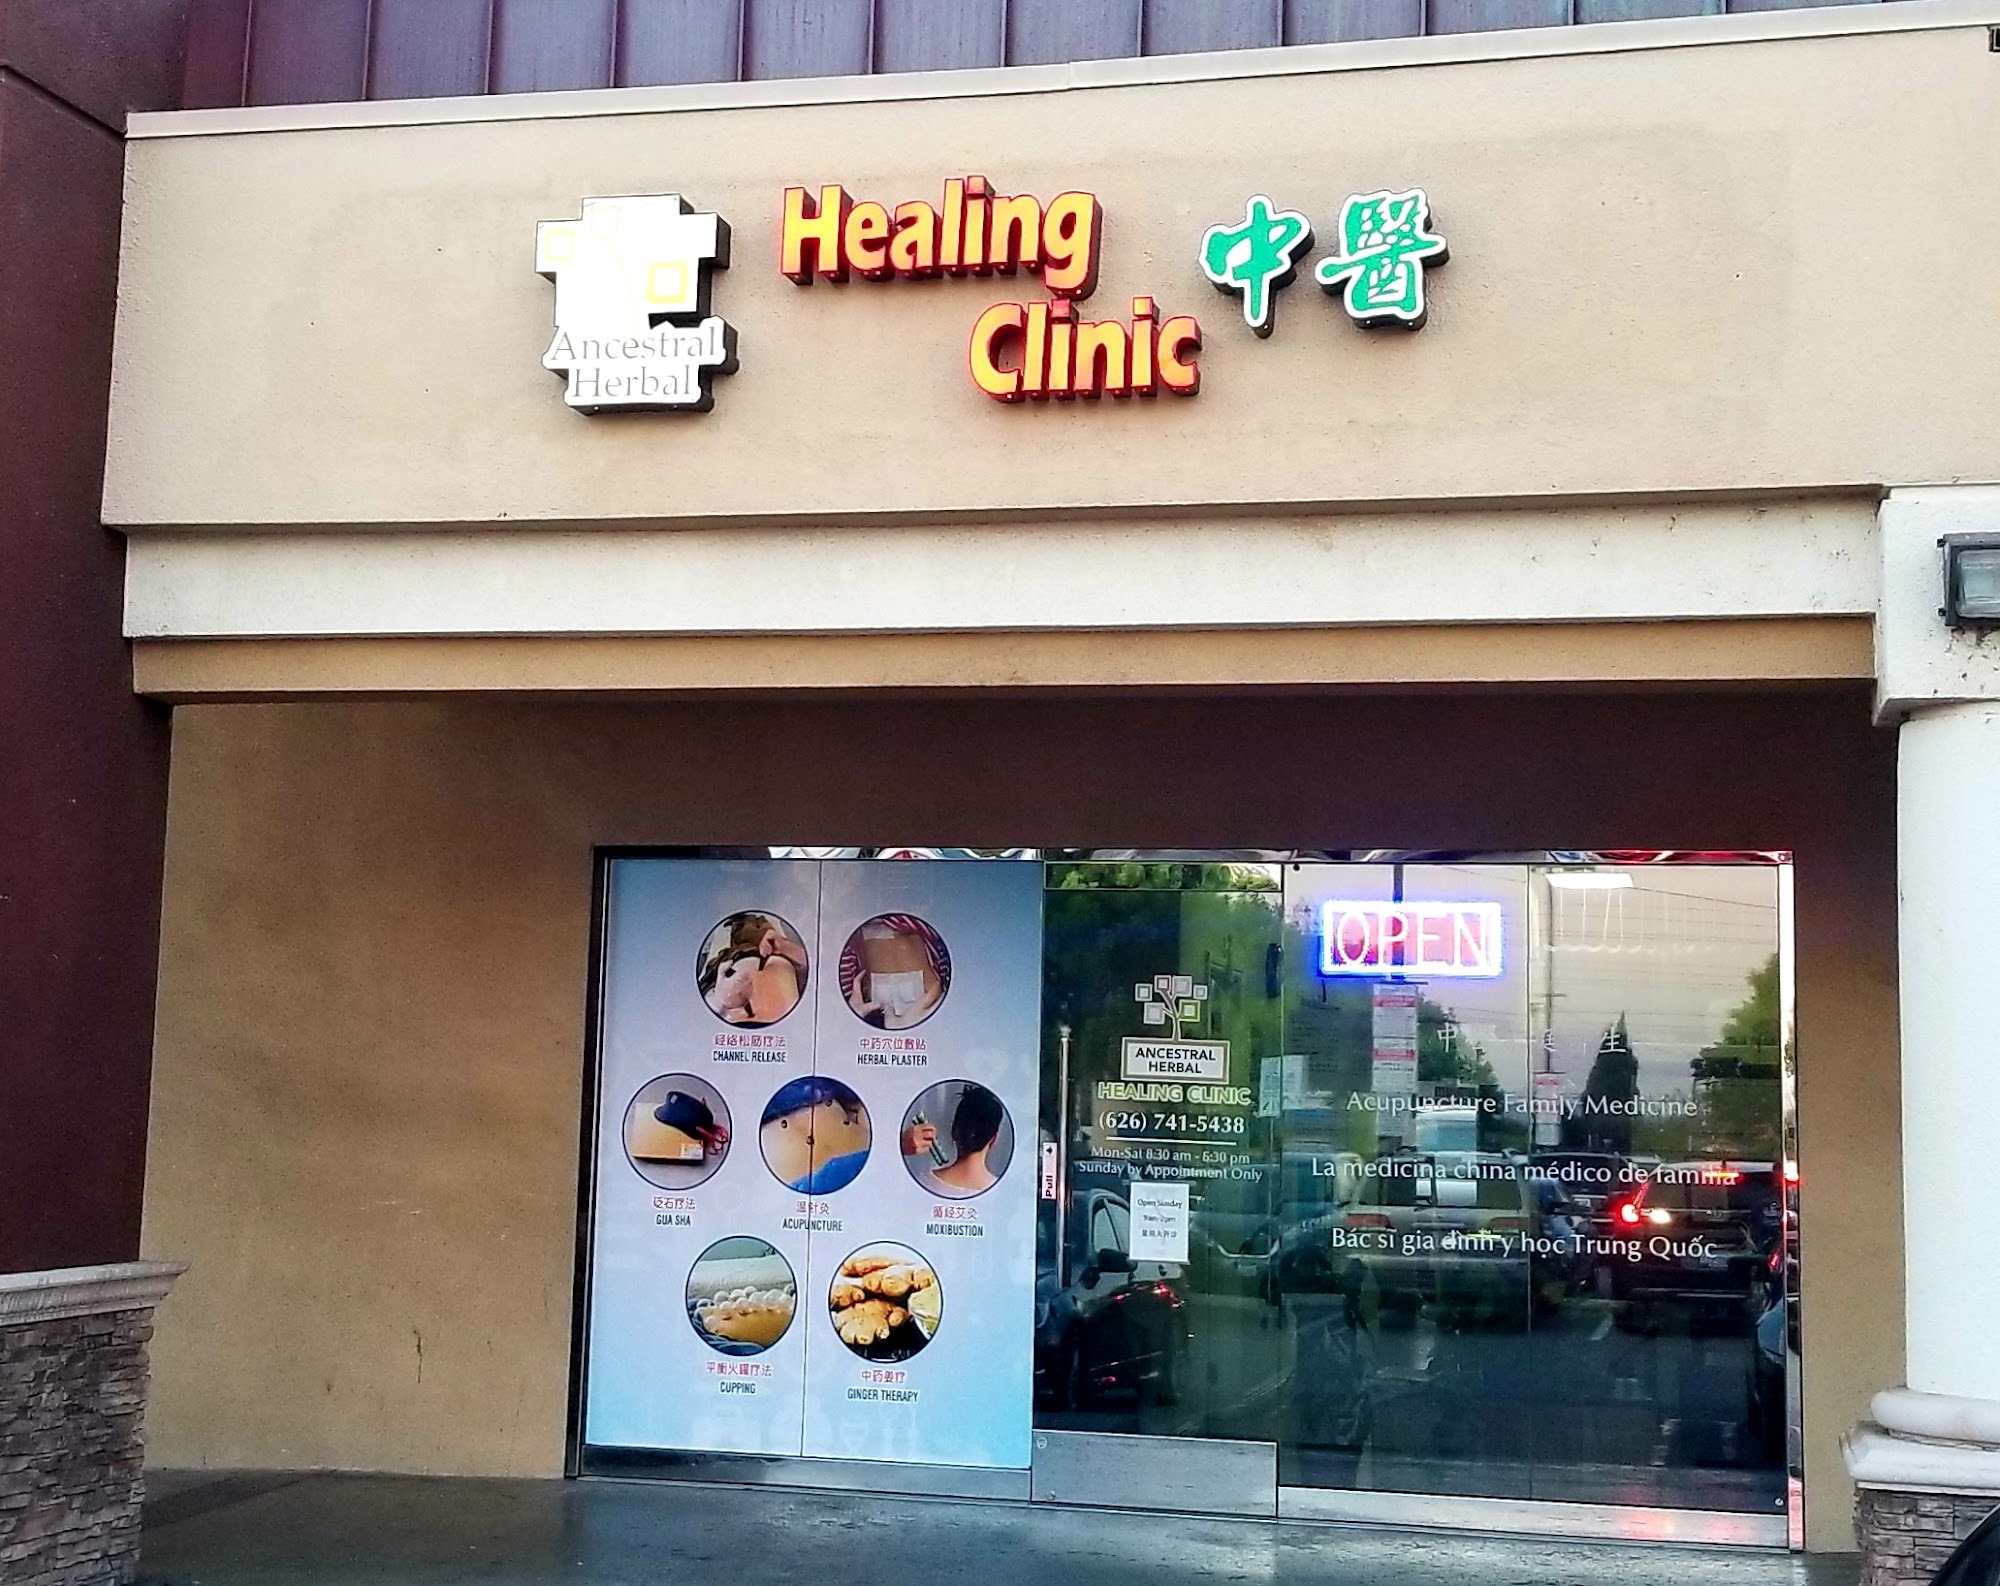 Ancestral Herbal and Healing Clinic